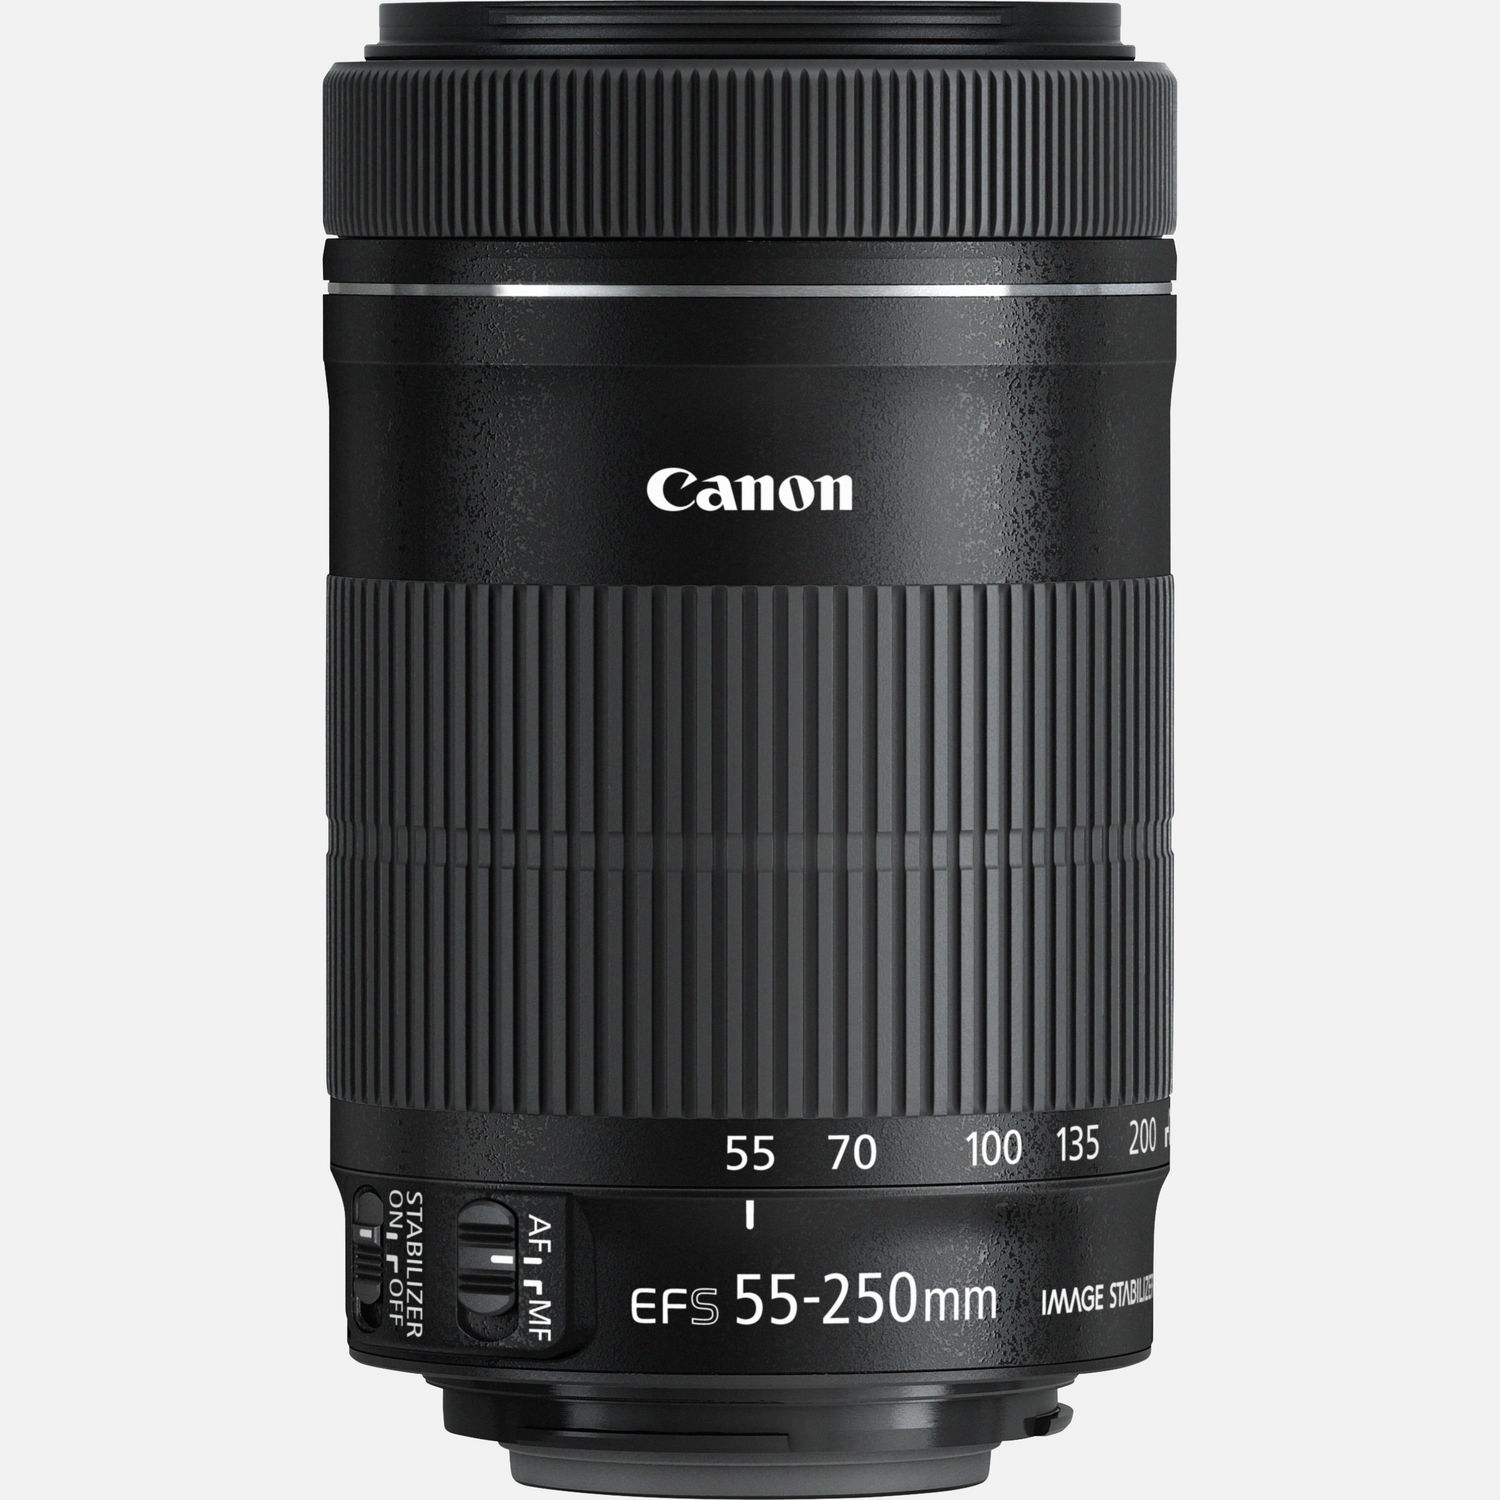 CANON EFS 55-250mm